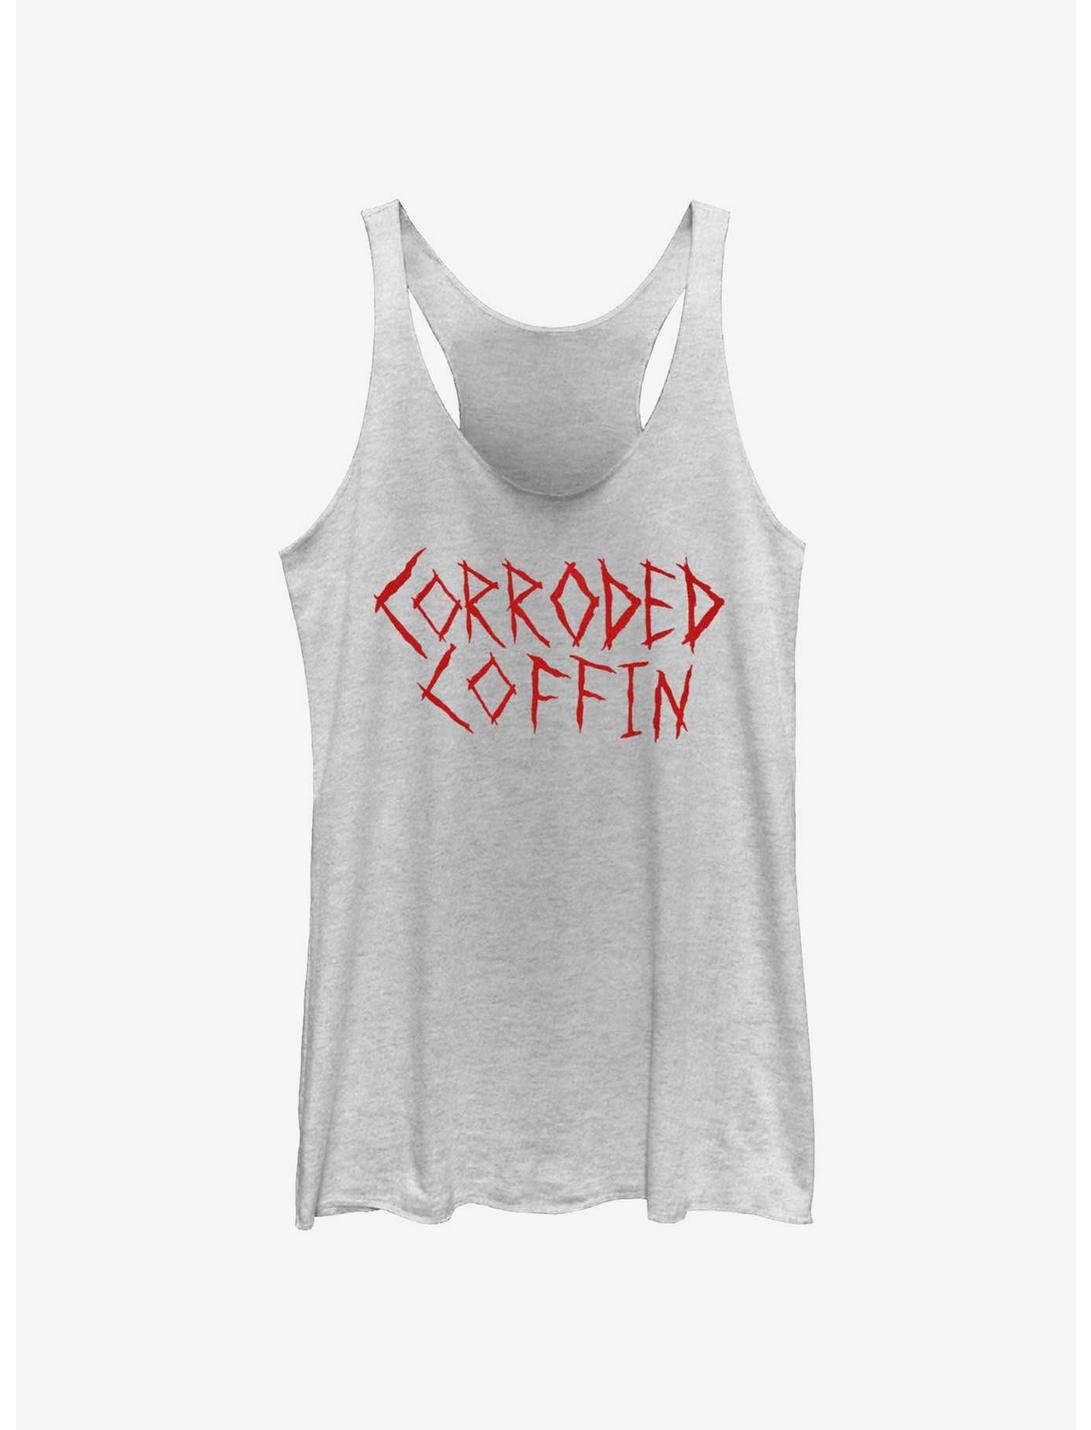 Stranger Things Corroded Coffin Womens Tank Top, WHITE HTR, hi-res